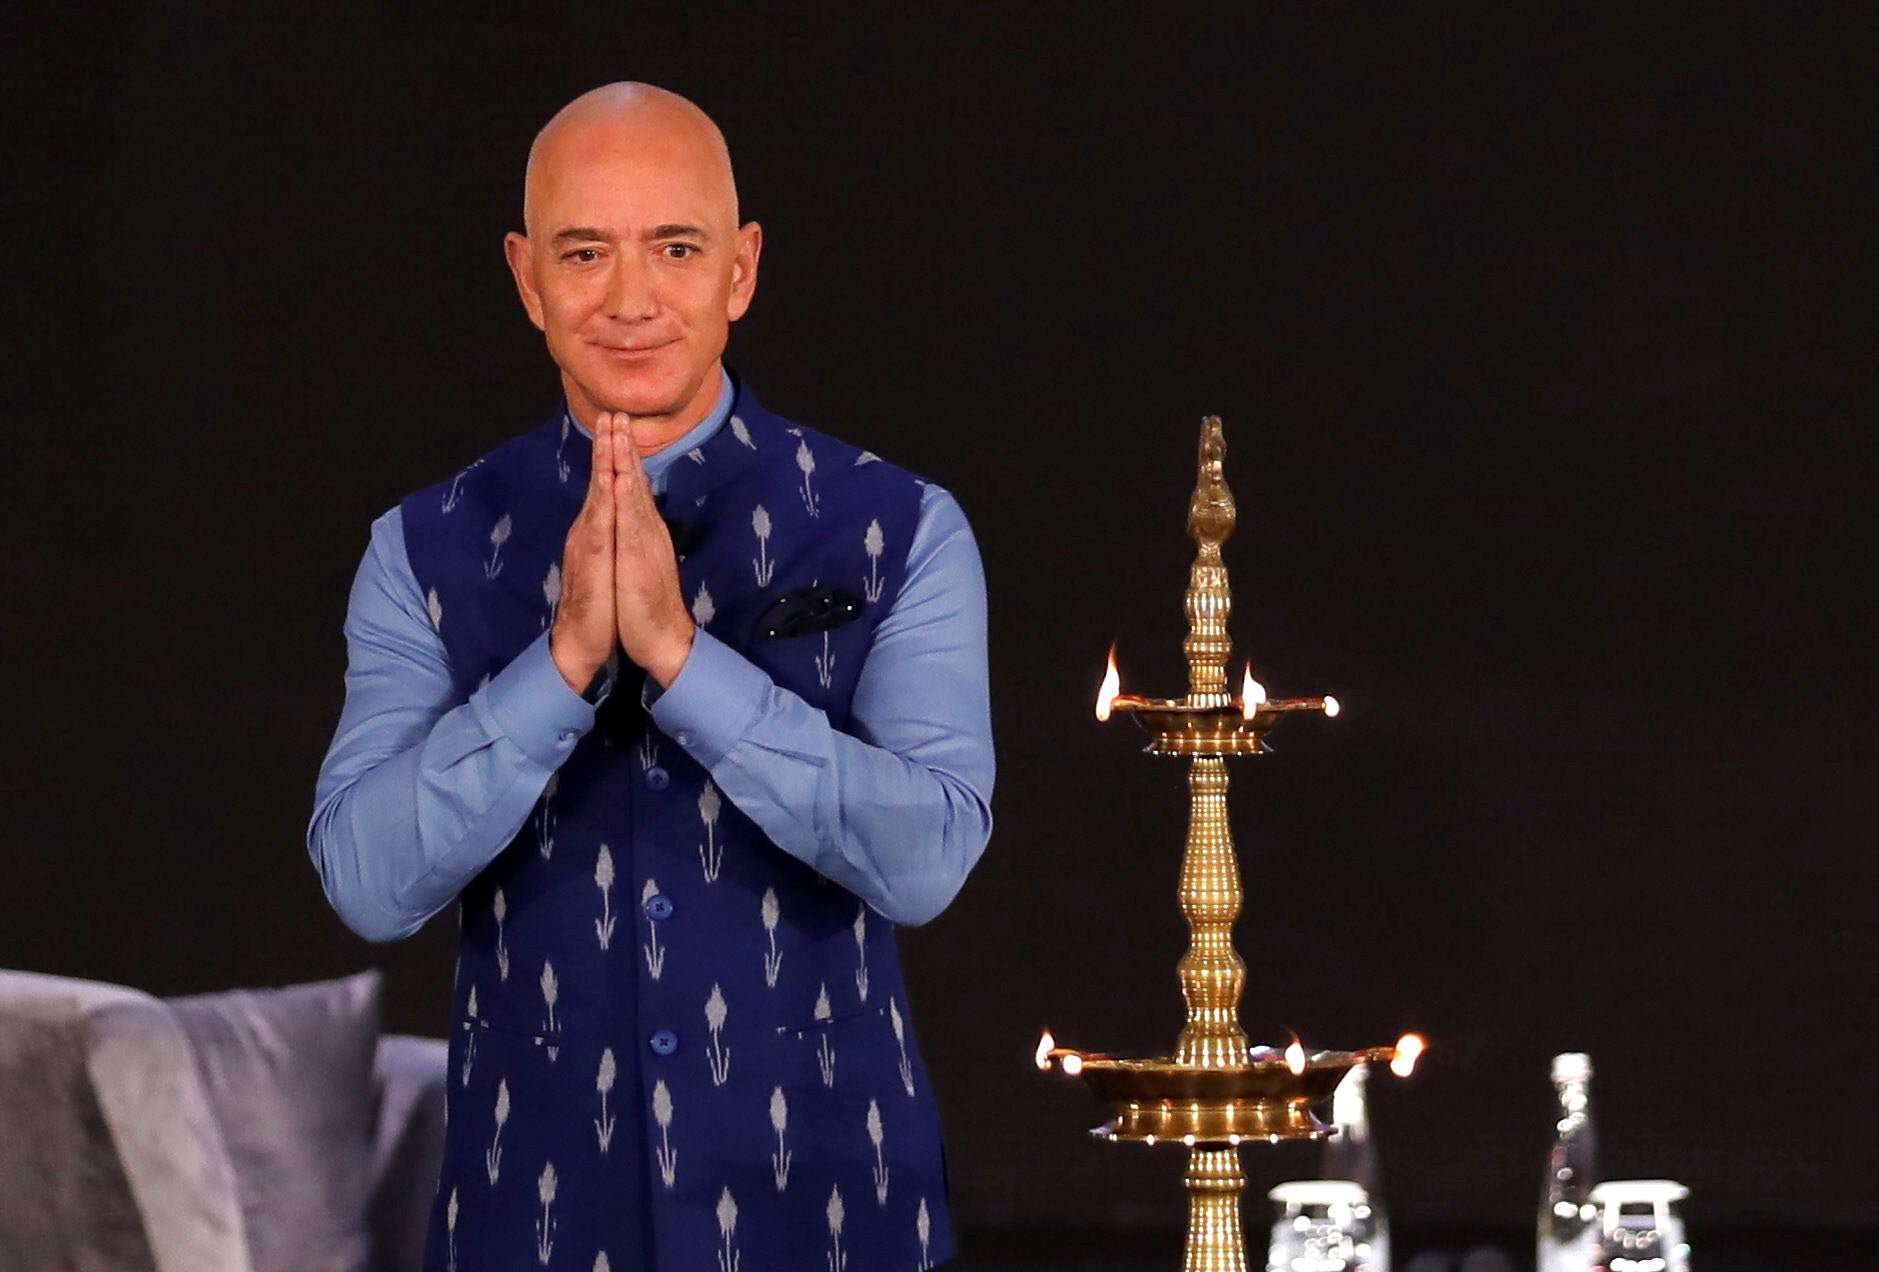 image for Amazon promises to create 1m jobs in India as Jeff Bezos trip descends into PR nightmare